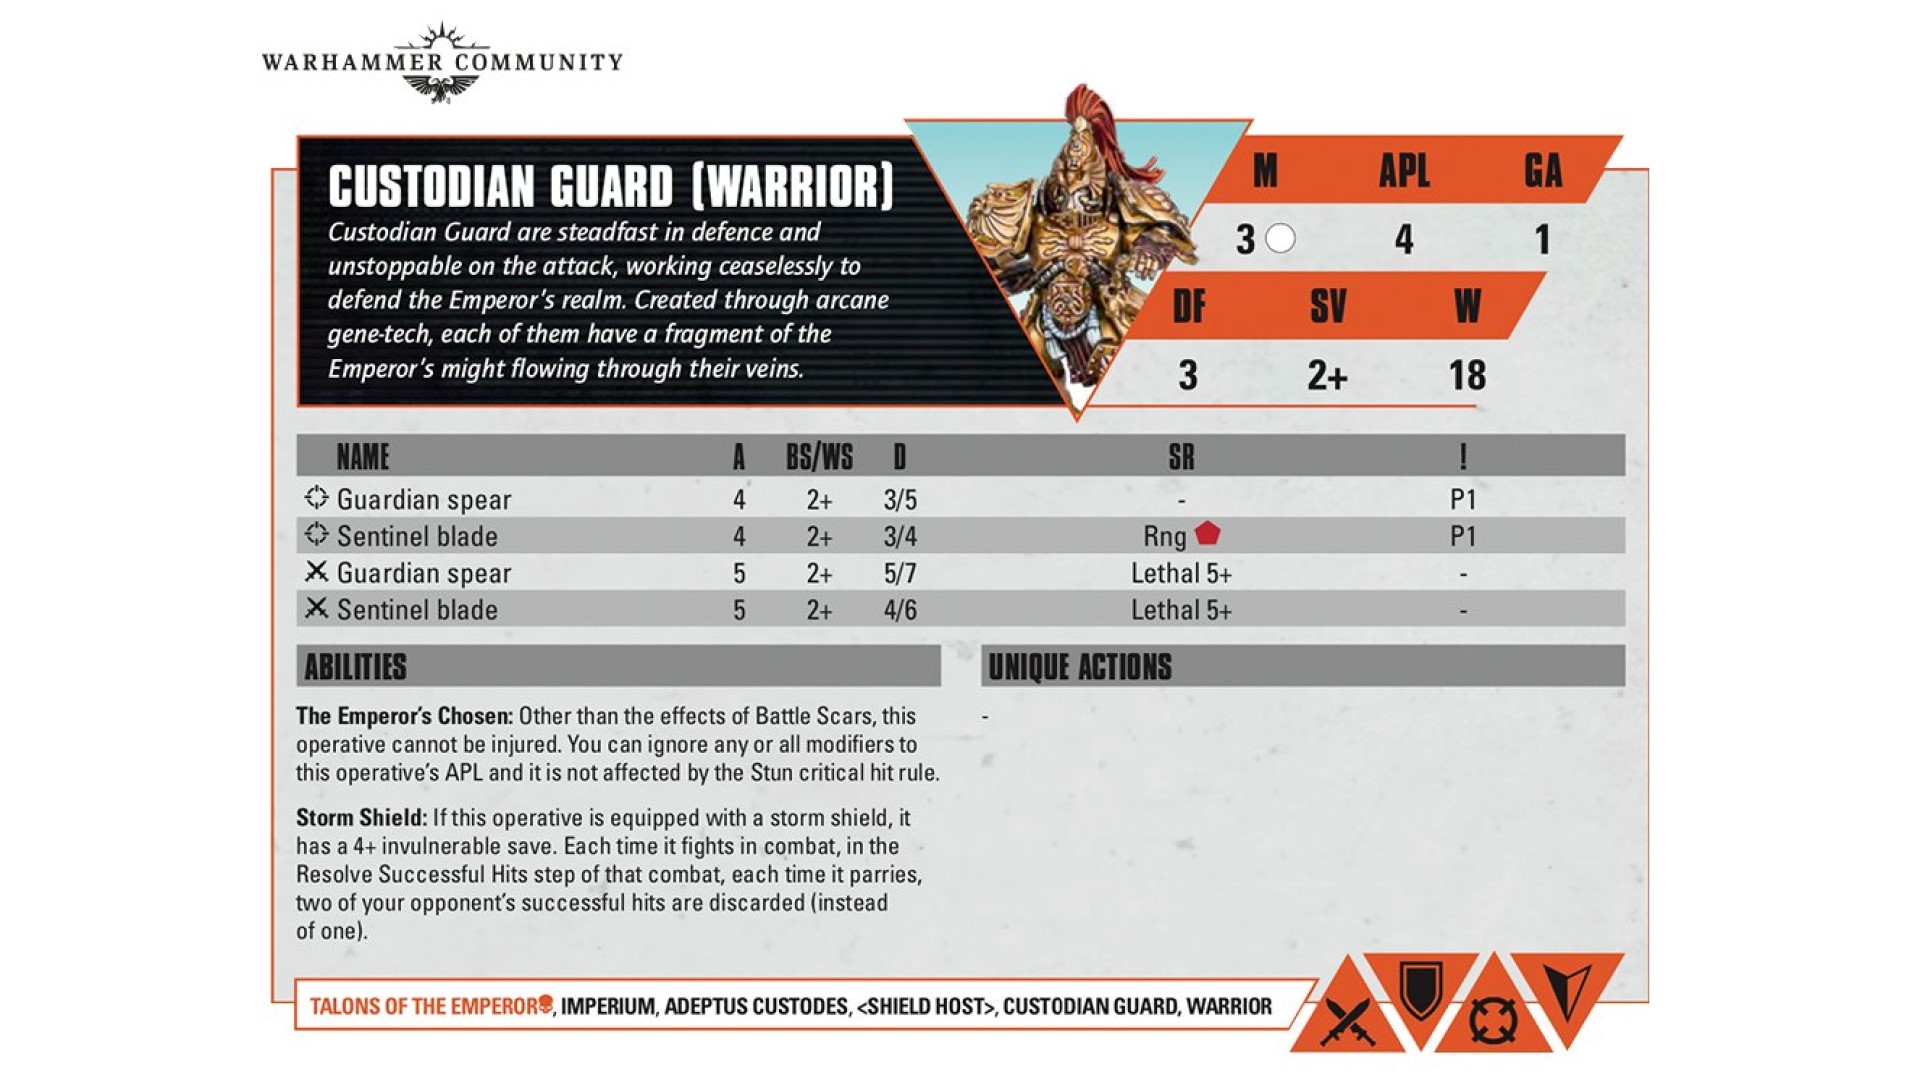 Kill Team 2nd Edition has new stats for 'actions', moving, and dodging